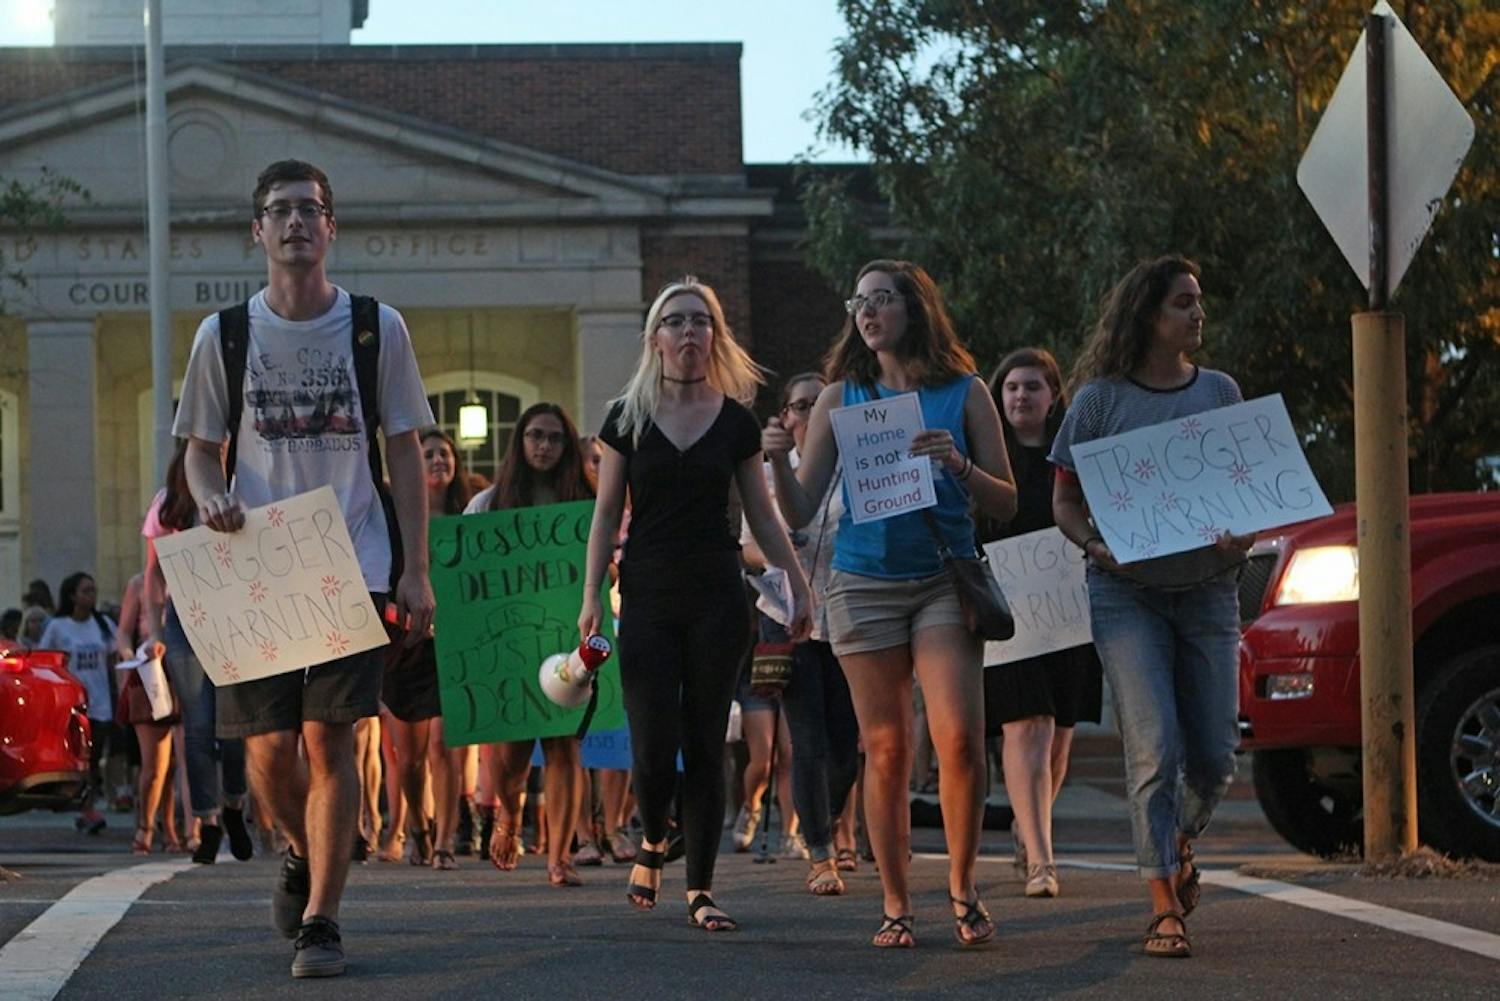 Demonstrators march from the Peace and Justice Plaza on Franklin Street on Friday evening.